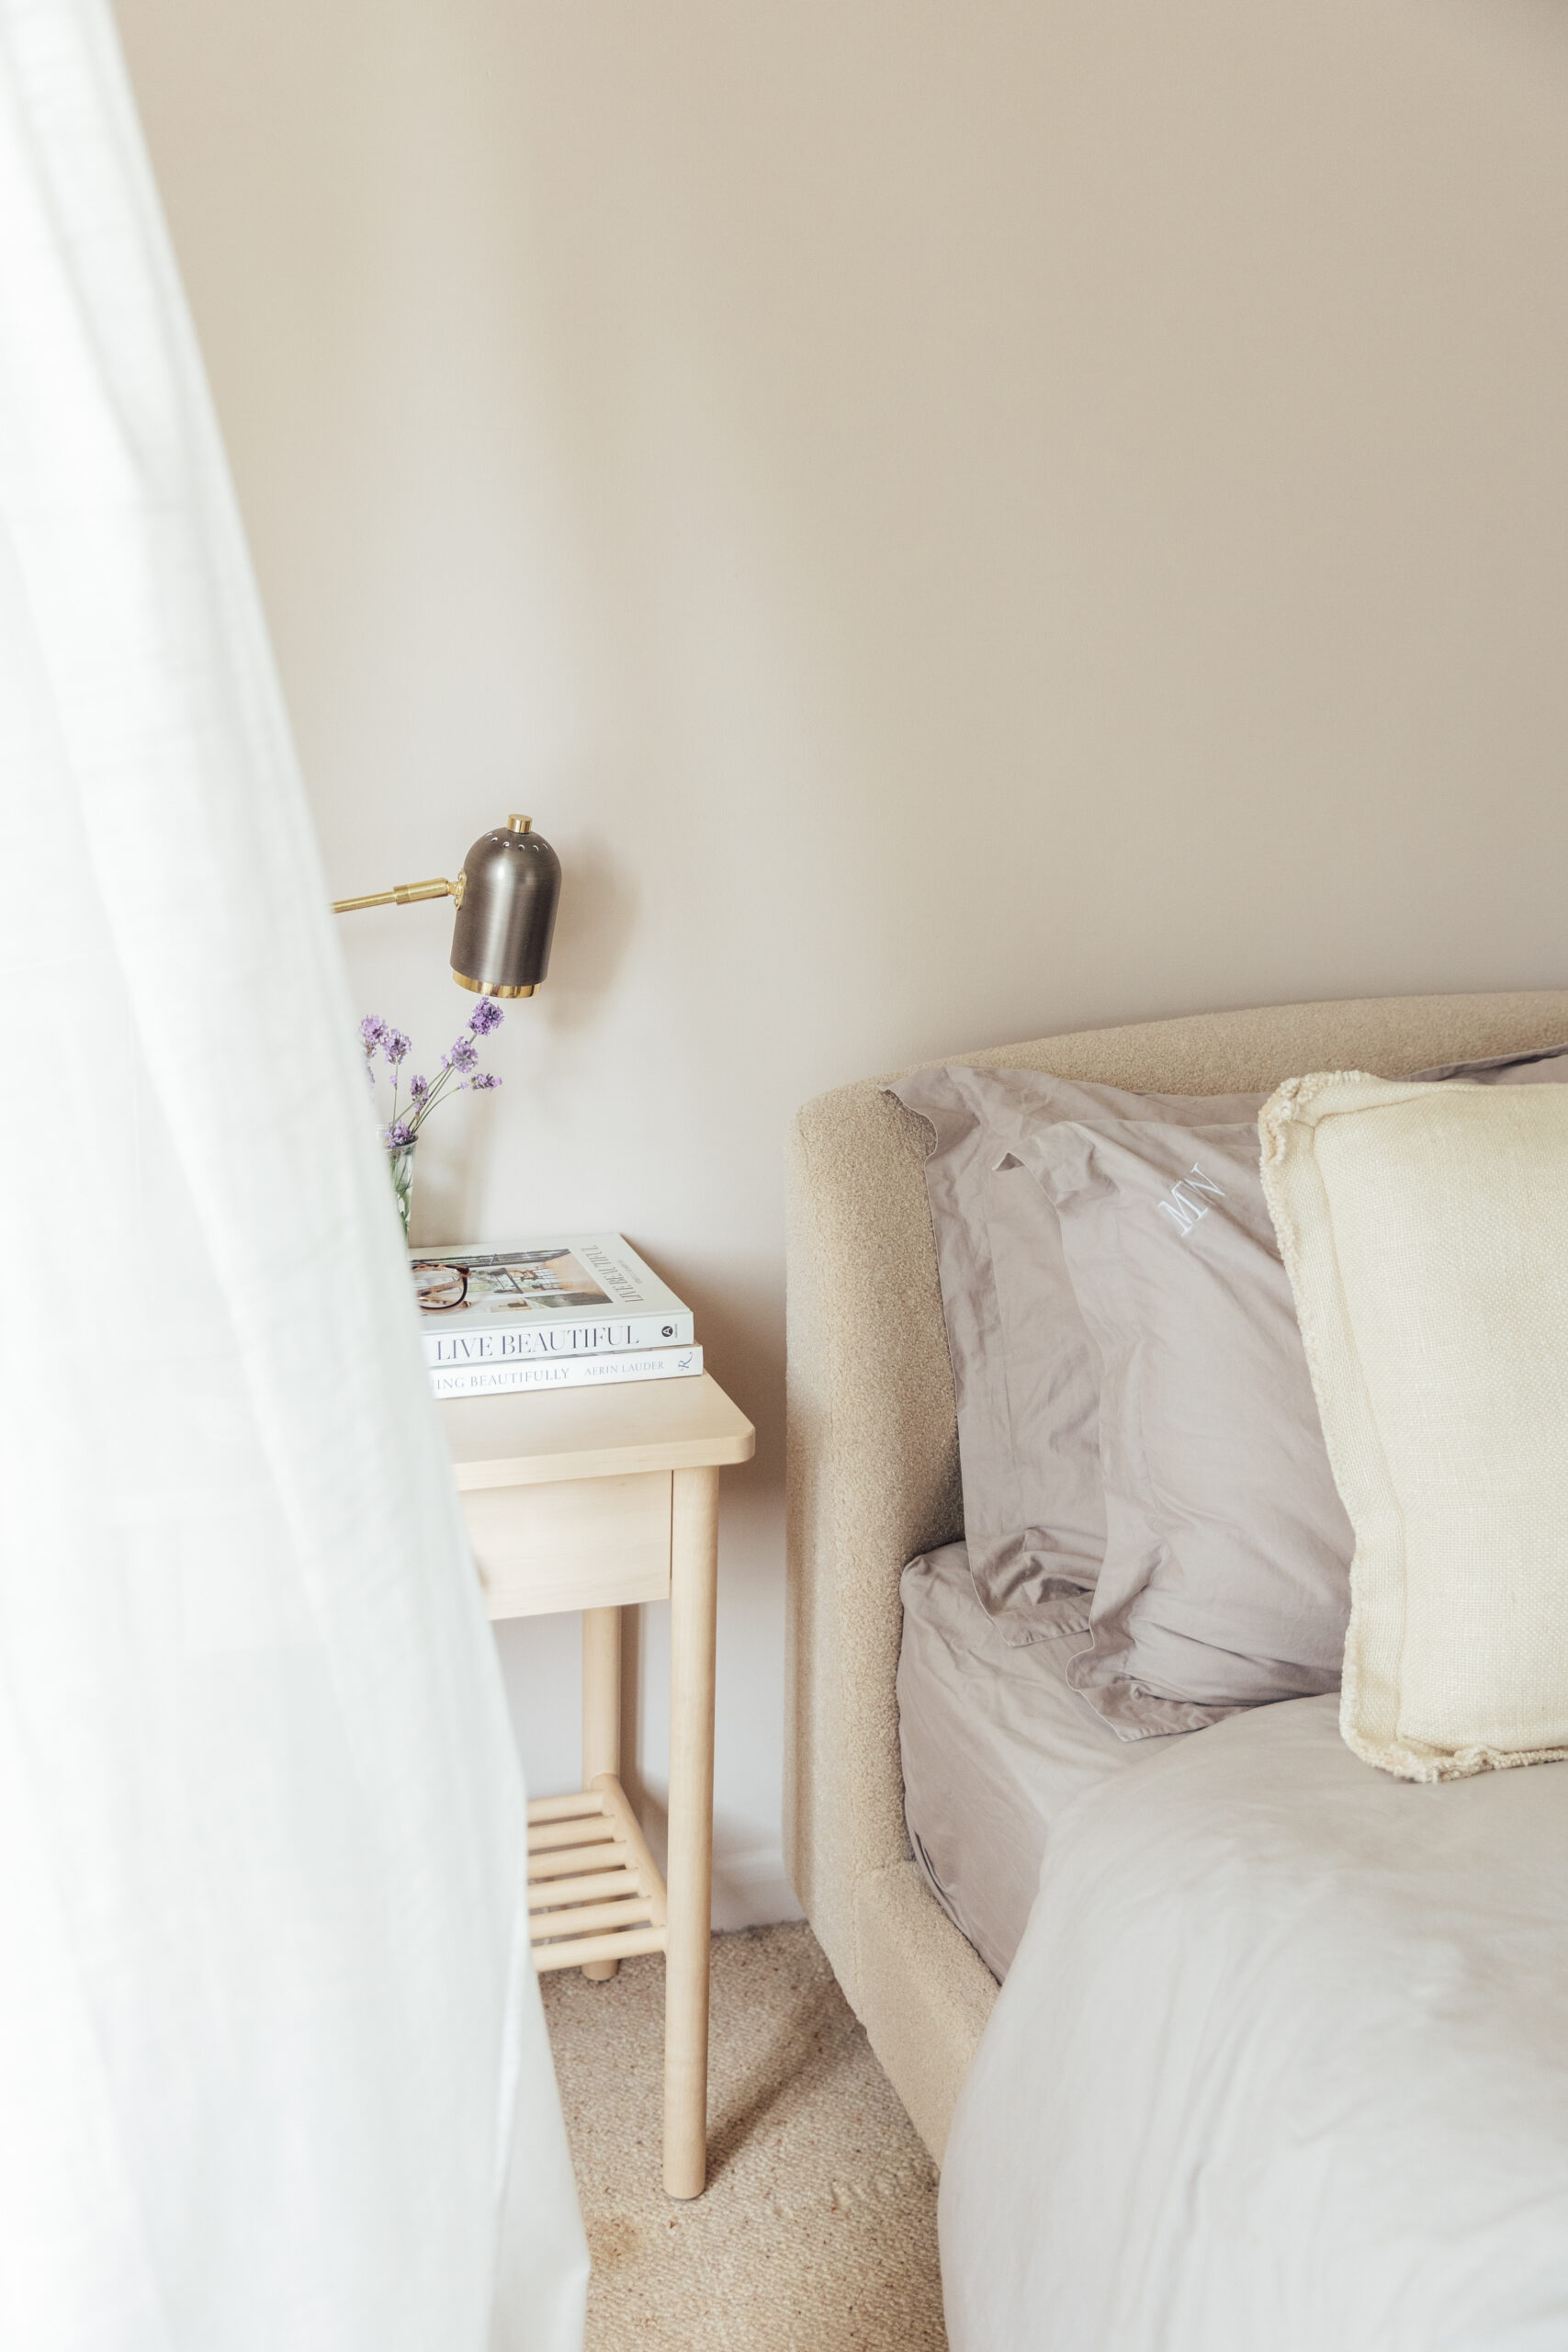 Dreamy Warm Neutral Bedroom Tour | Warm Soft Hues Used Throughout Our Bedroom Monica Beatrice Blog